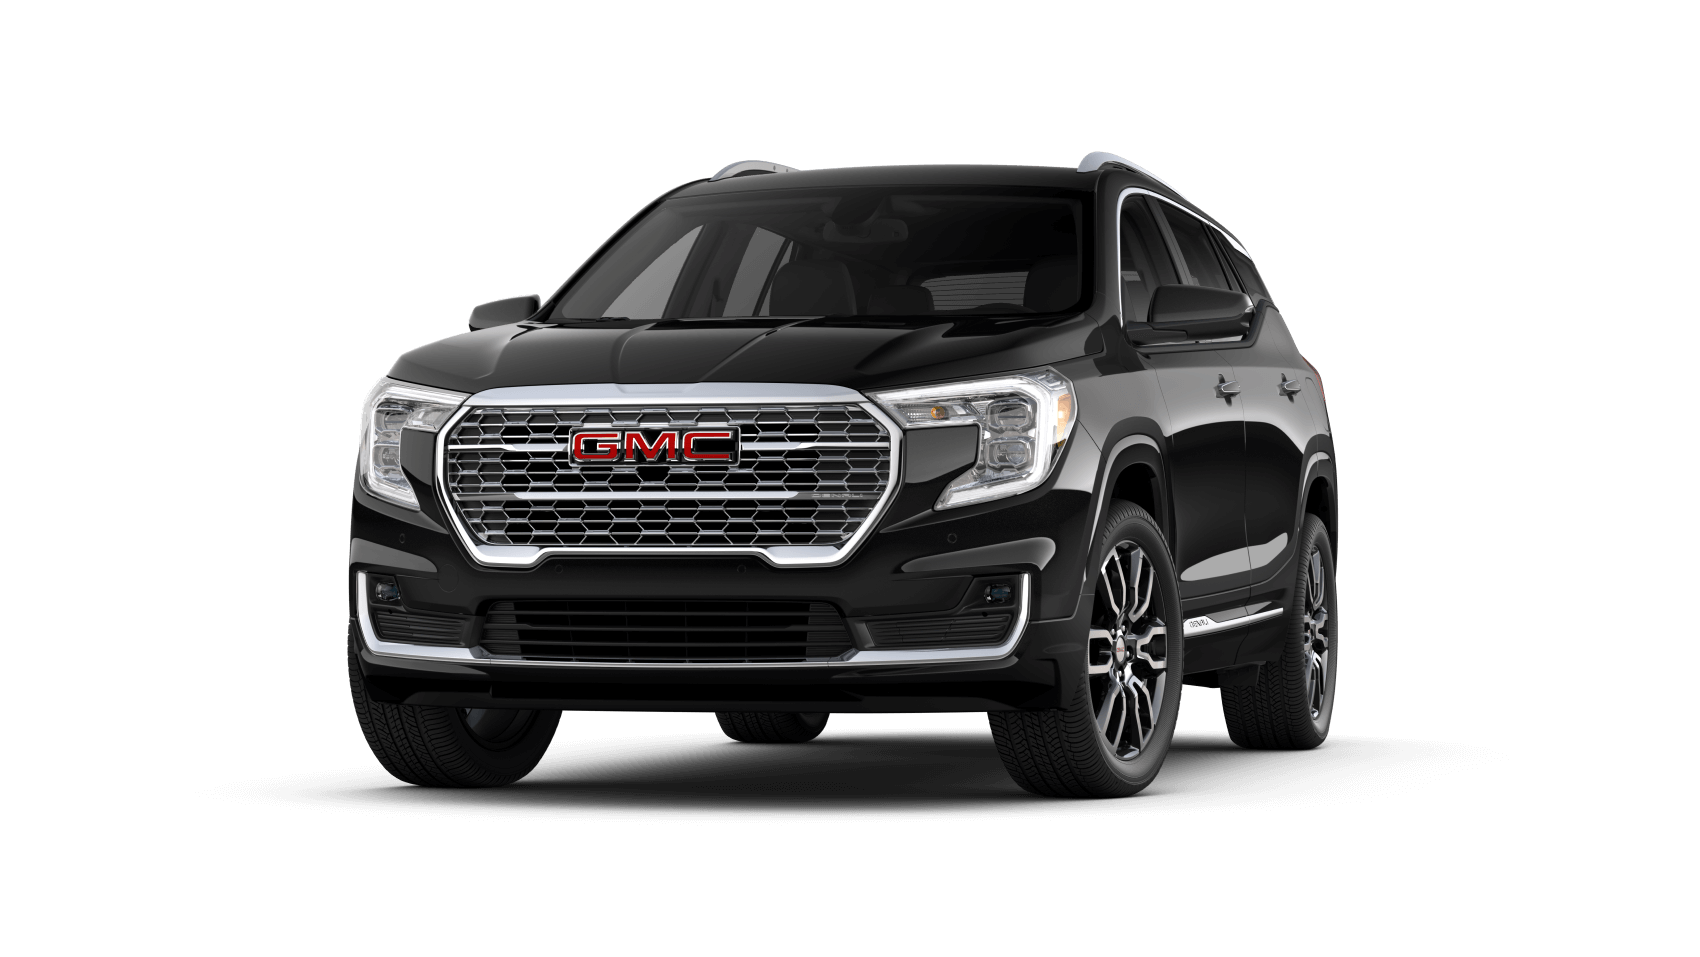 GMC Terrain for lease Fishers IN